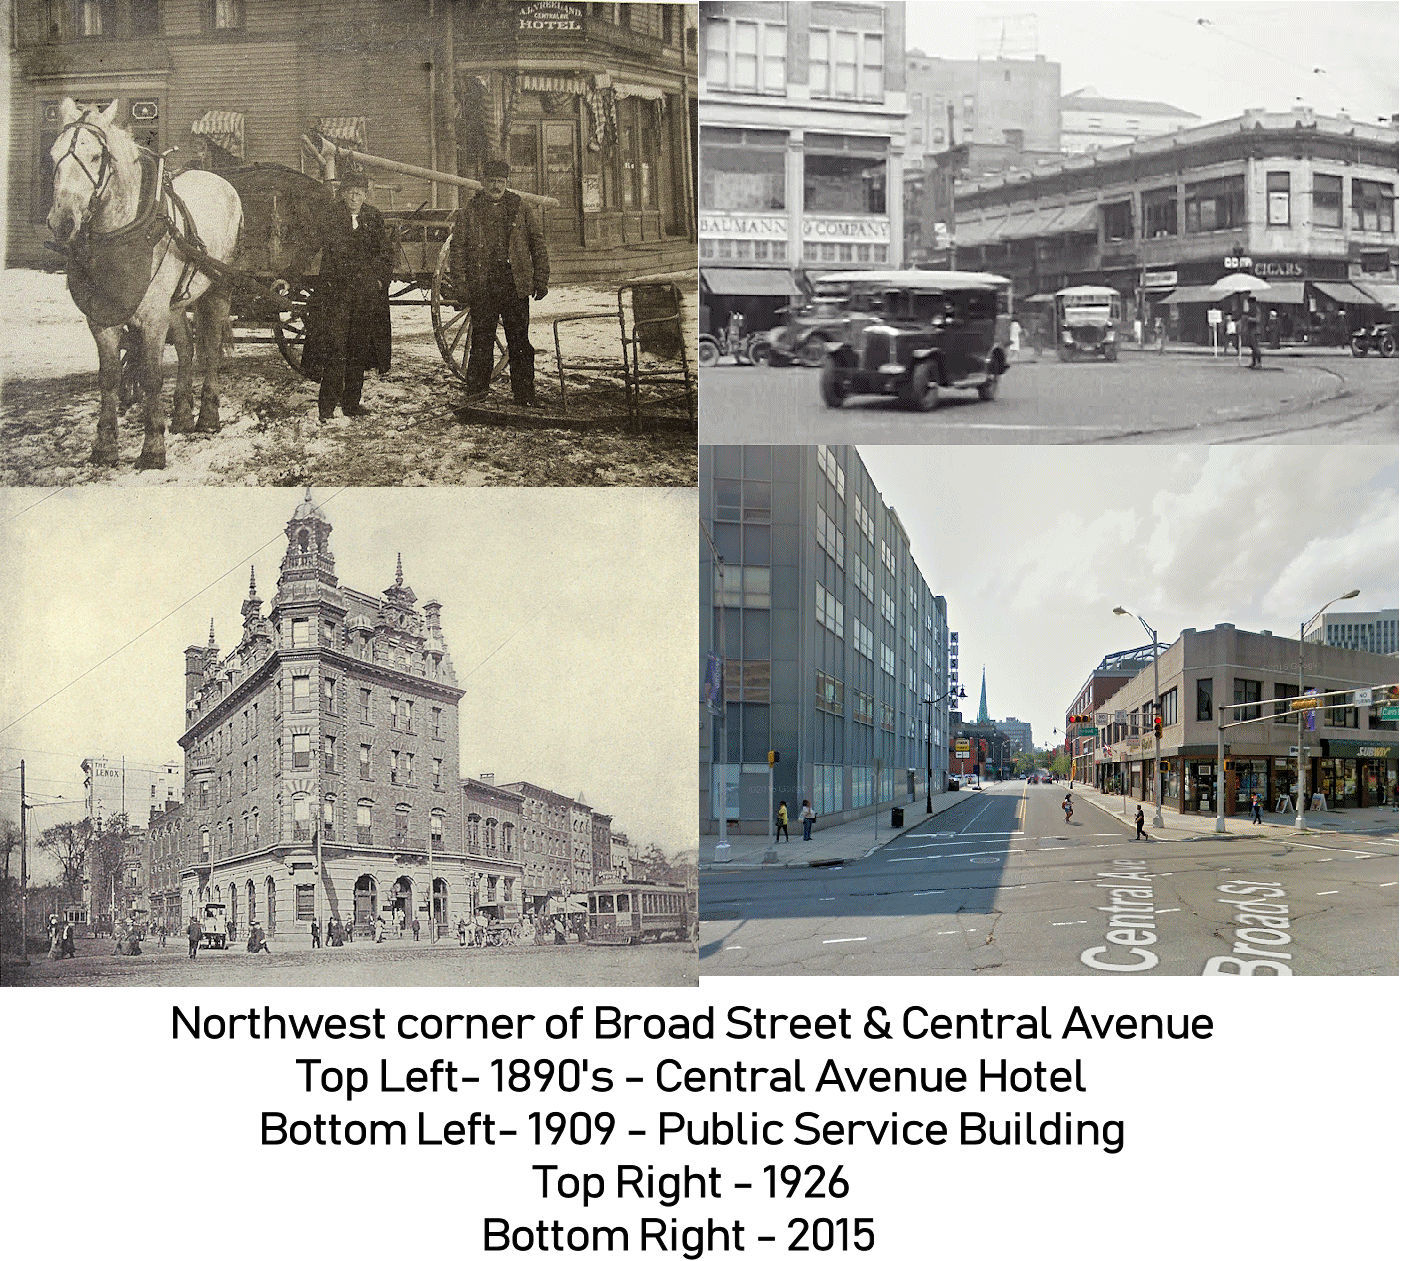 Broad Street & Central Avenue
